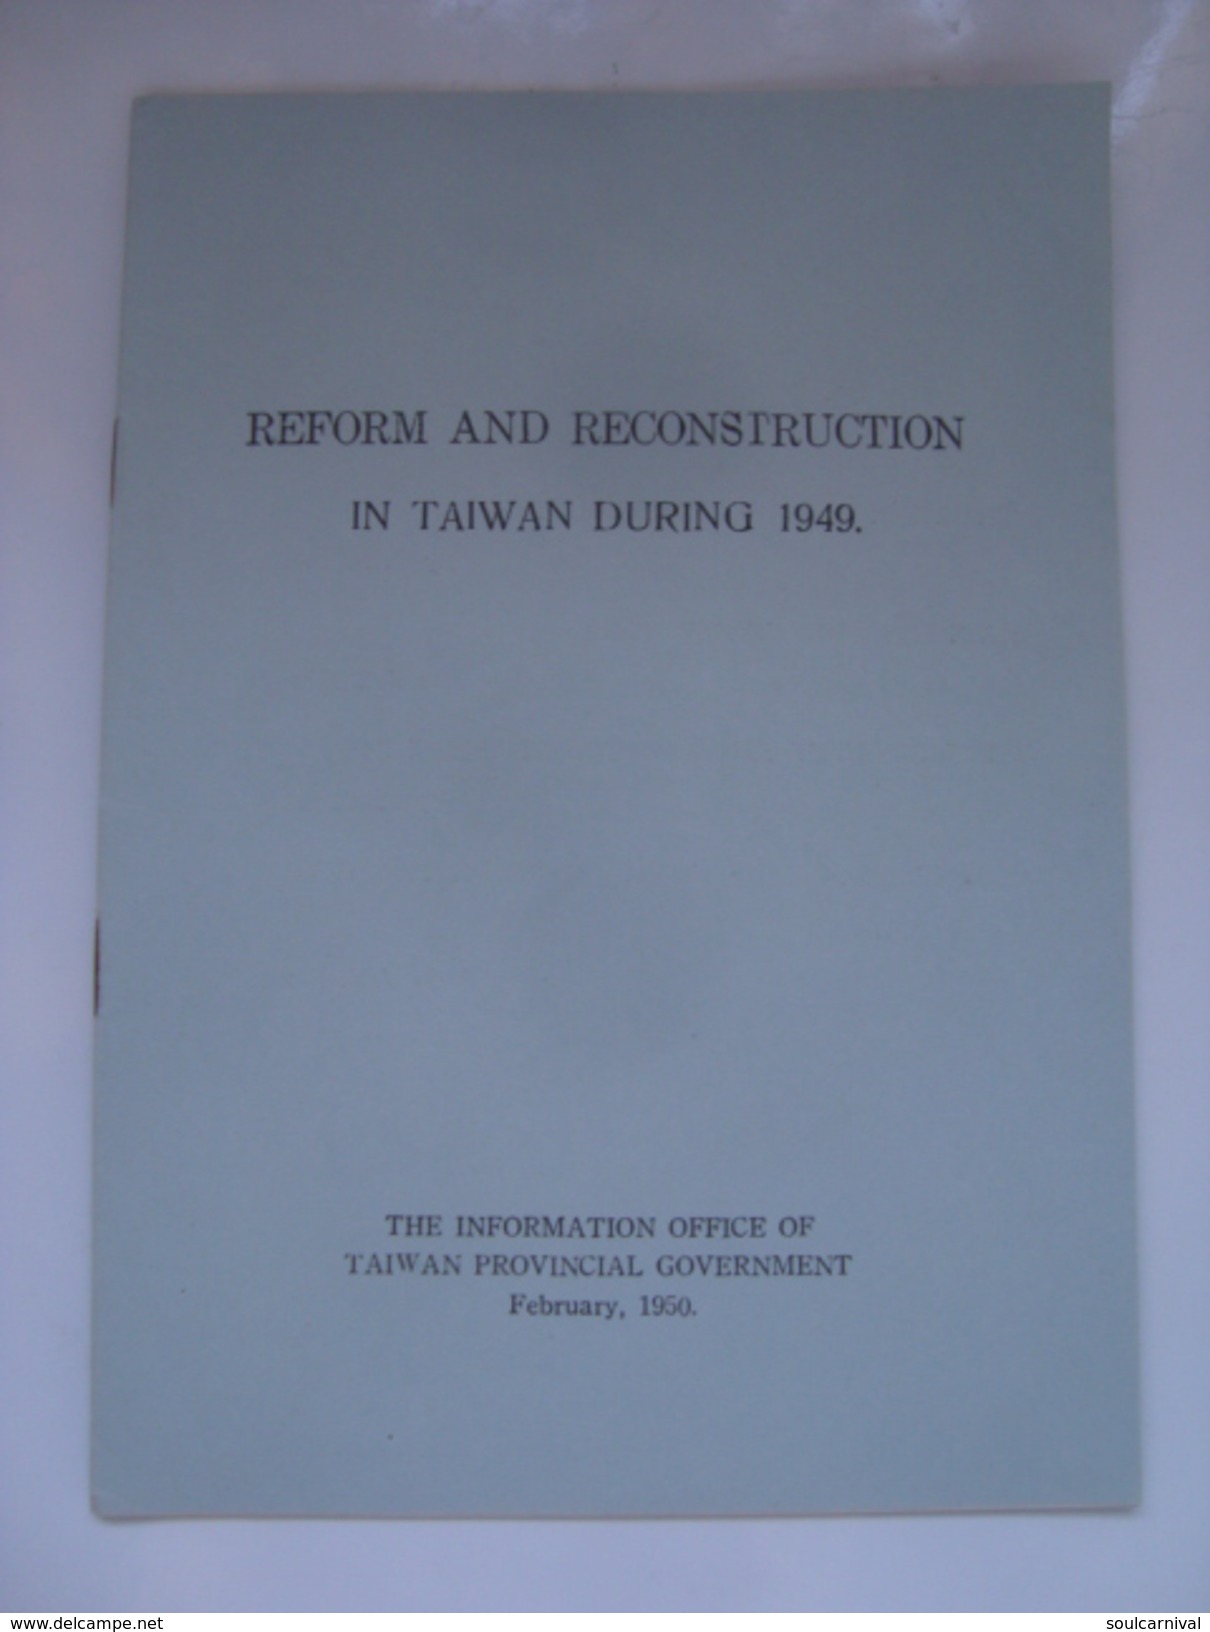 REFORM AND RECONSTRUCTION IN TAIWAN DURING 1949 - INFORMATION OFFICE OF TAIWAN PROVINCIAL GOVERNMENT. T. N. TSAI. - Asien